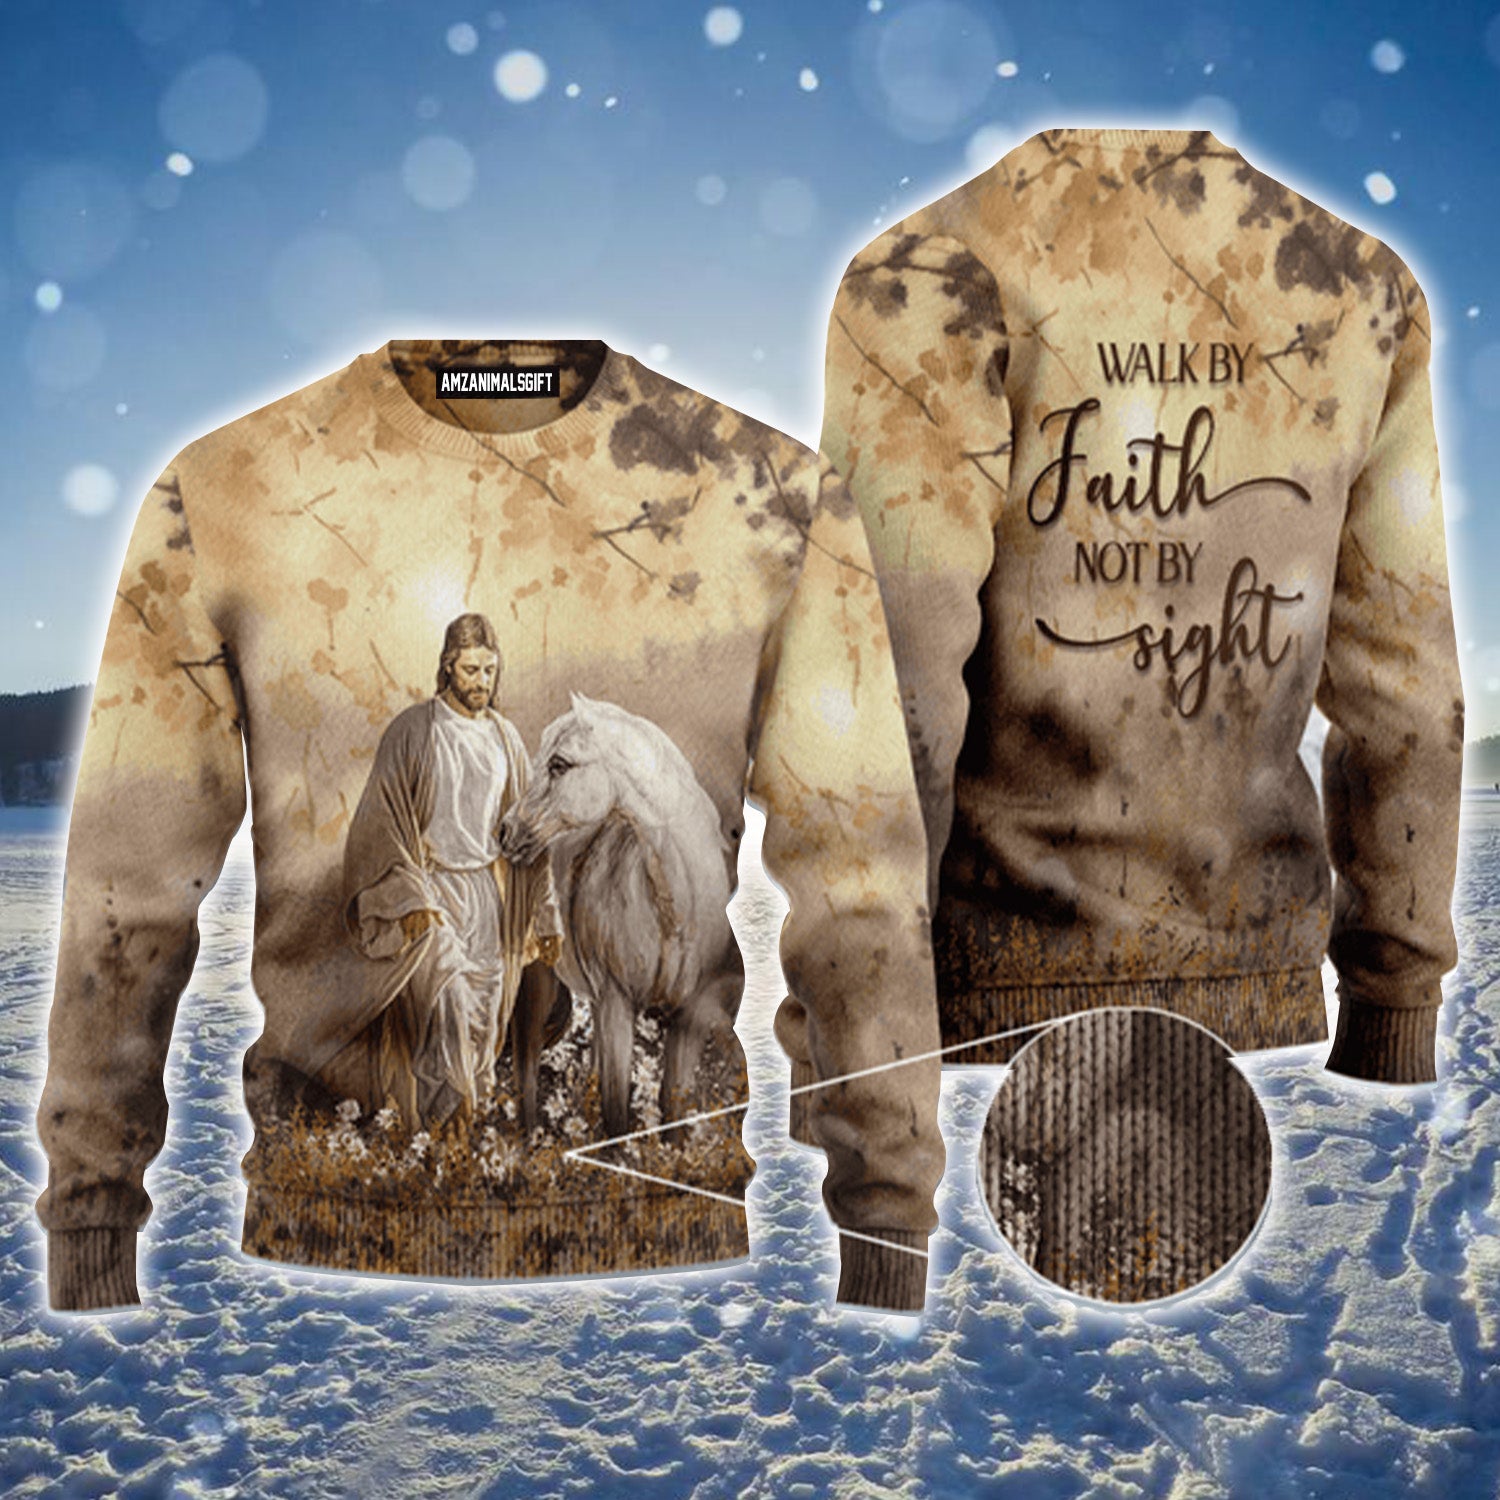 Jesus Love Horse Dandelion Walk By Faith Not By Sight Urly Sweater, Christmas Sweater For Men & Women - Perfect Gift For New Year, Winter, Christmas